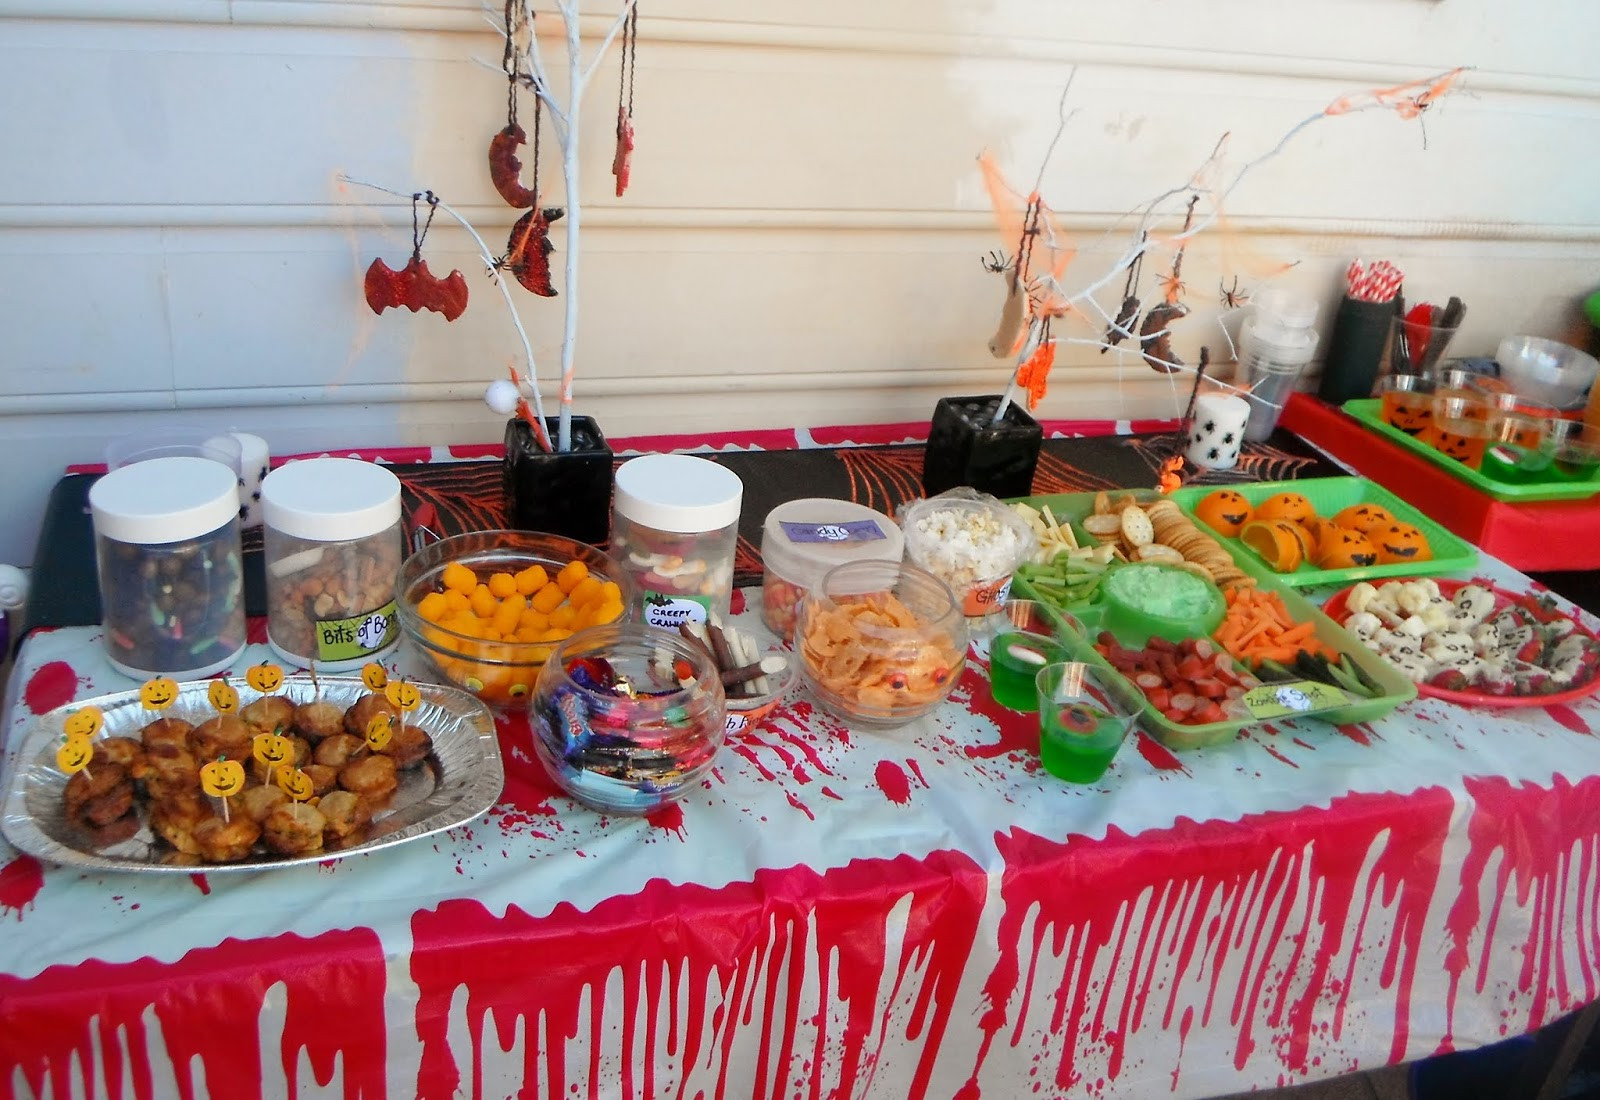 Party Food Ideas For Teens
 Adventures at home with Mum Halloween Party Food